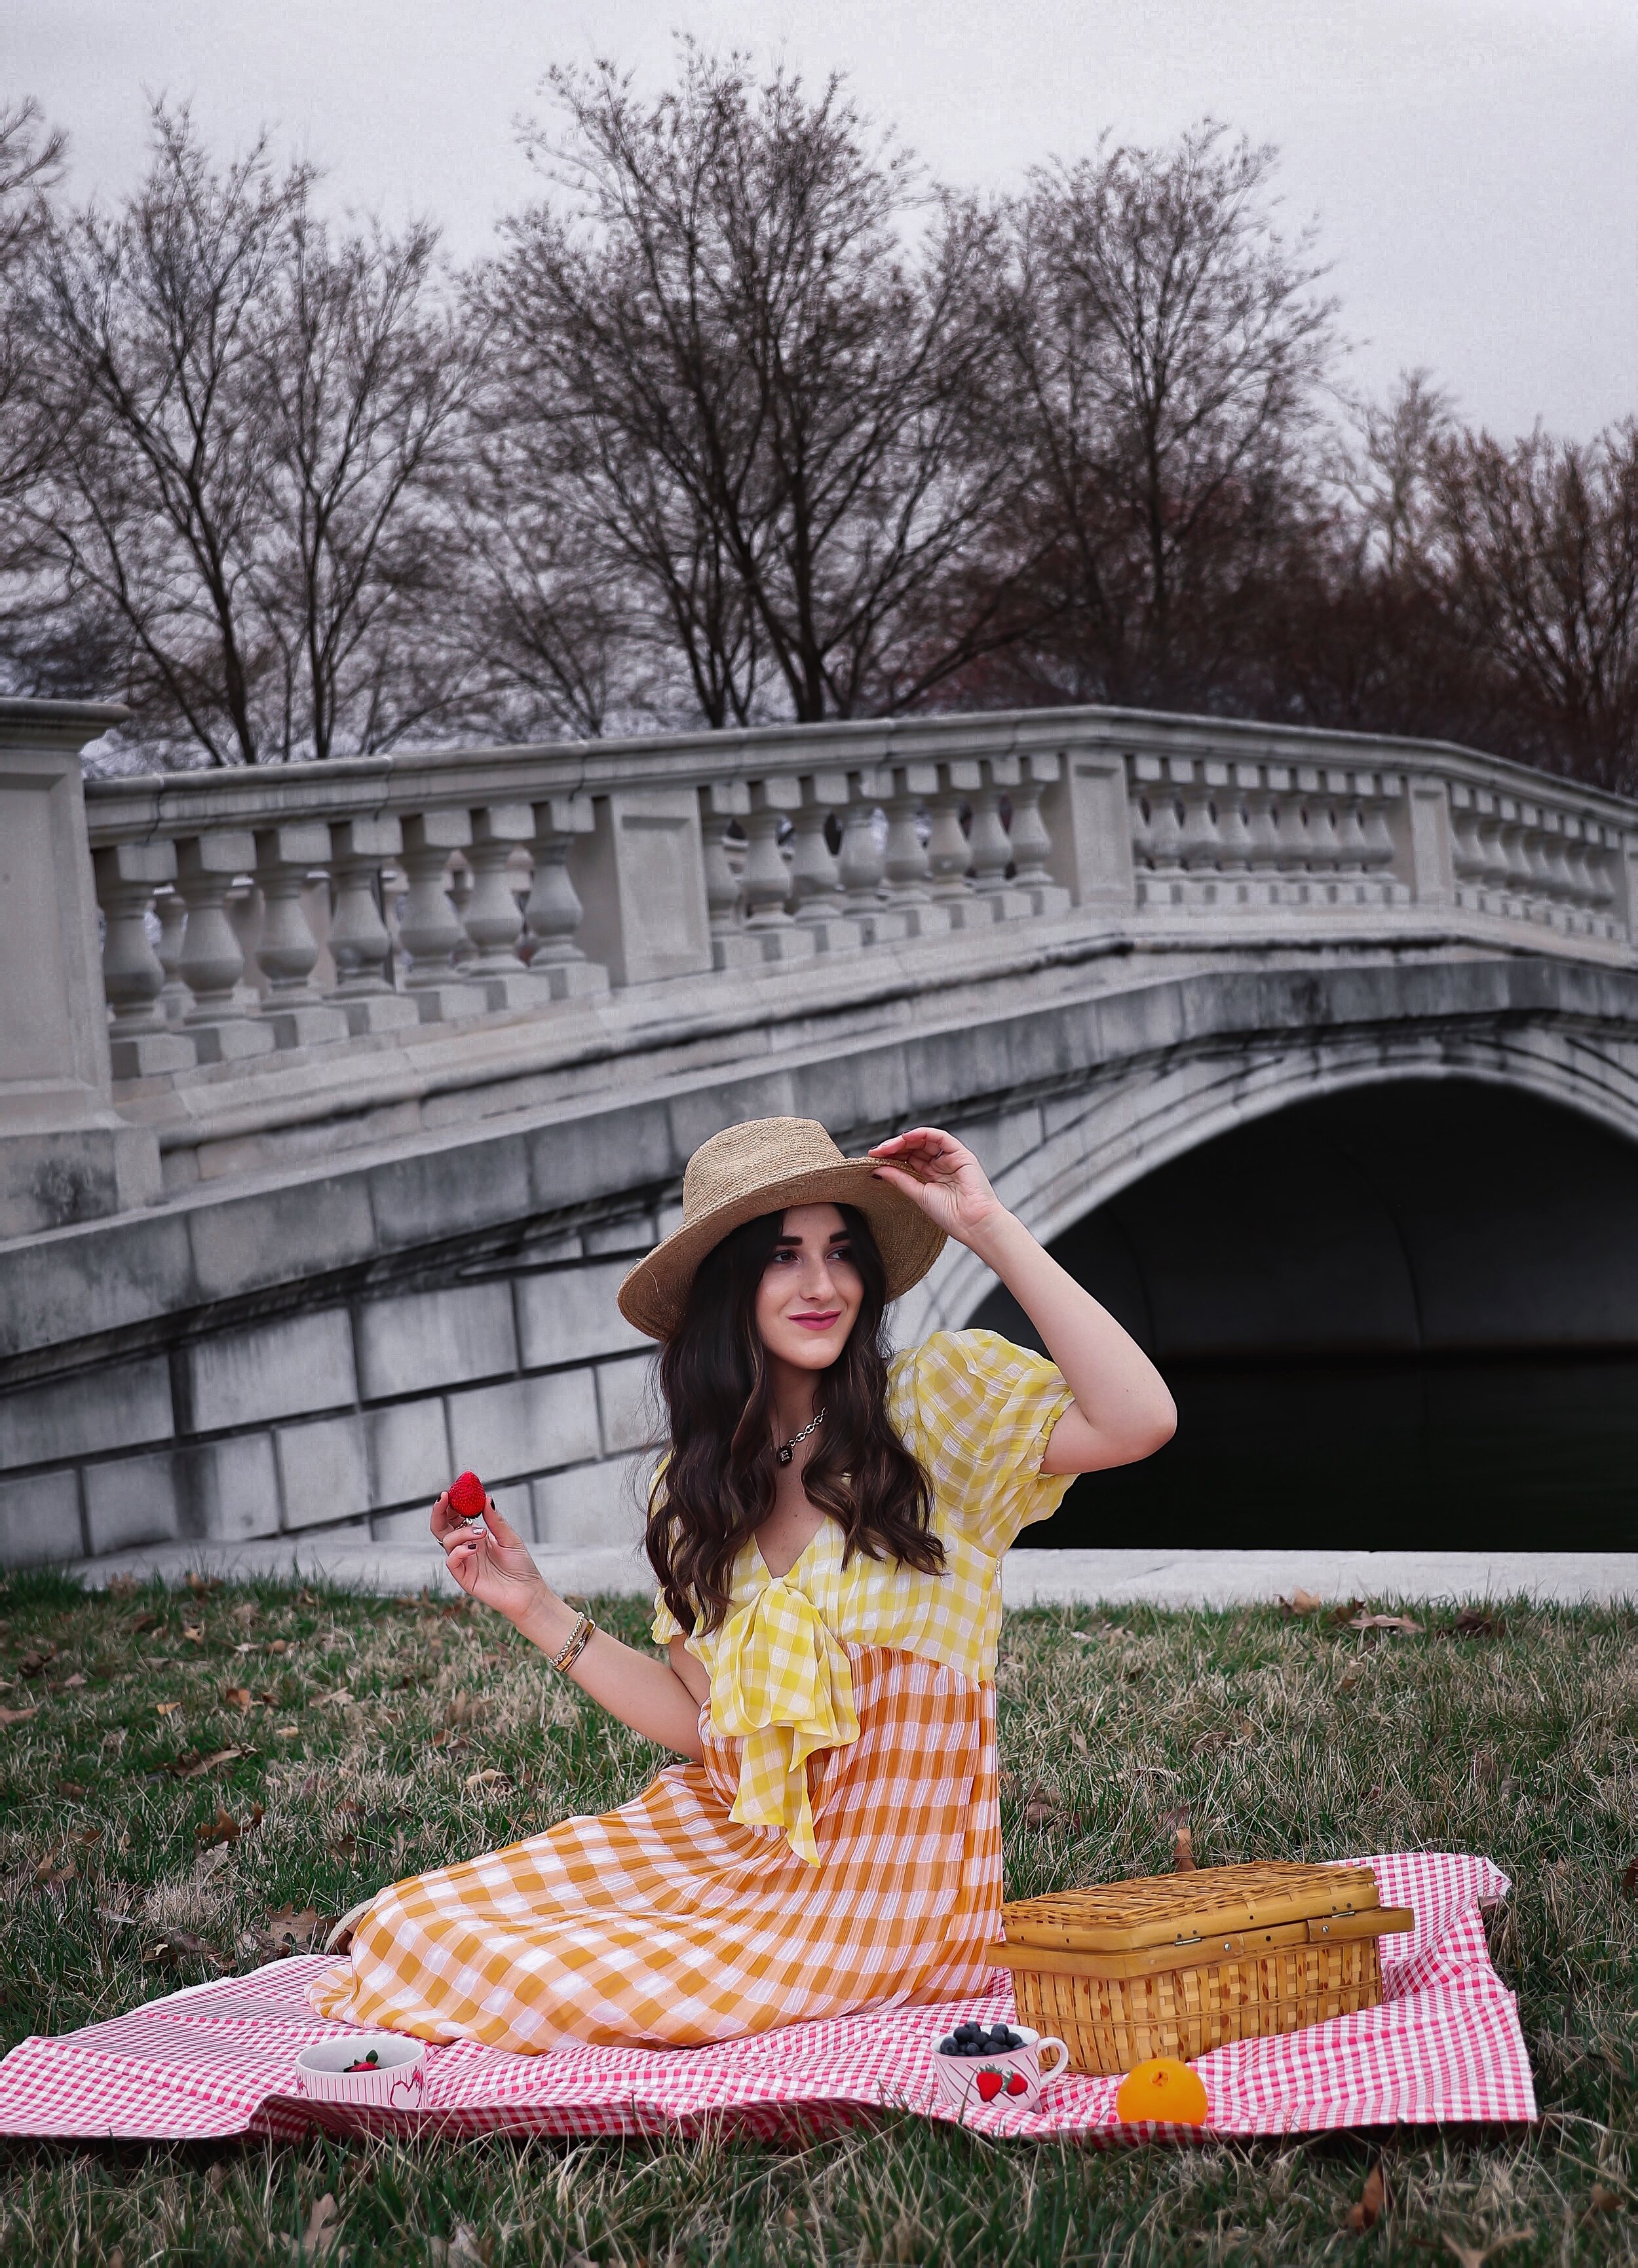 Gingham Midi Dress Summer Picnic Esther Santer NYC Street Style Fashion Blogger Fedora Checkered Maxi Orange Yellow Colorful Spring Stawberries Photoshoot St Louis Missouri Foxiedox Noa Initital Necklace Gold  Bracelets Rings Jewelry Forest Park Hat.JPG